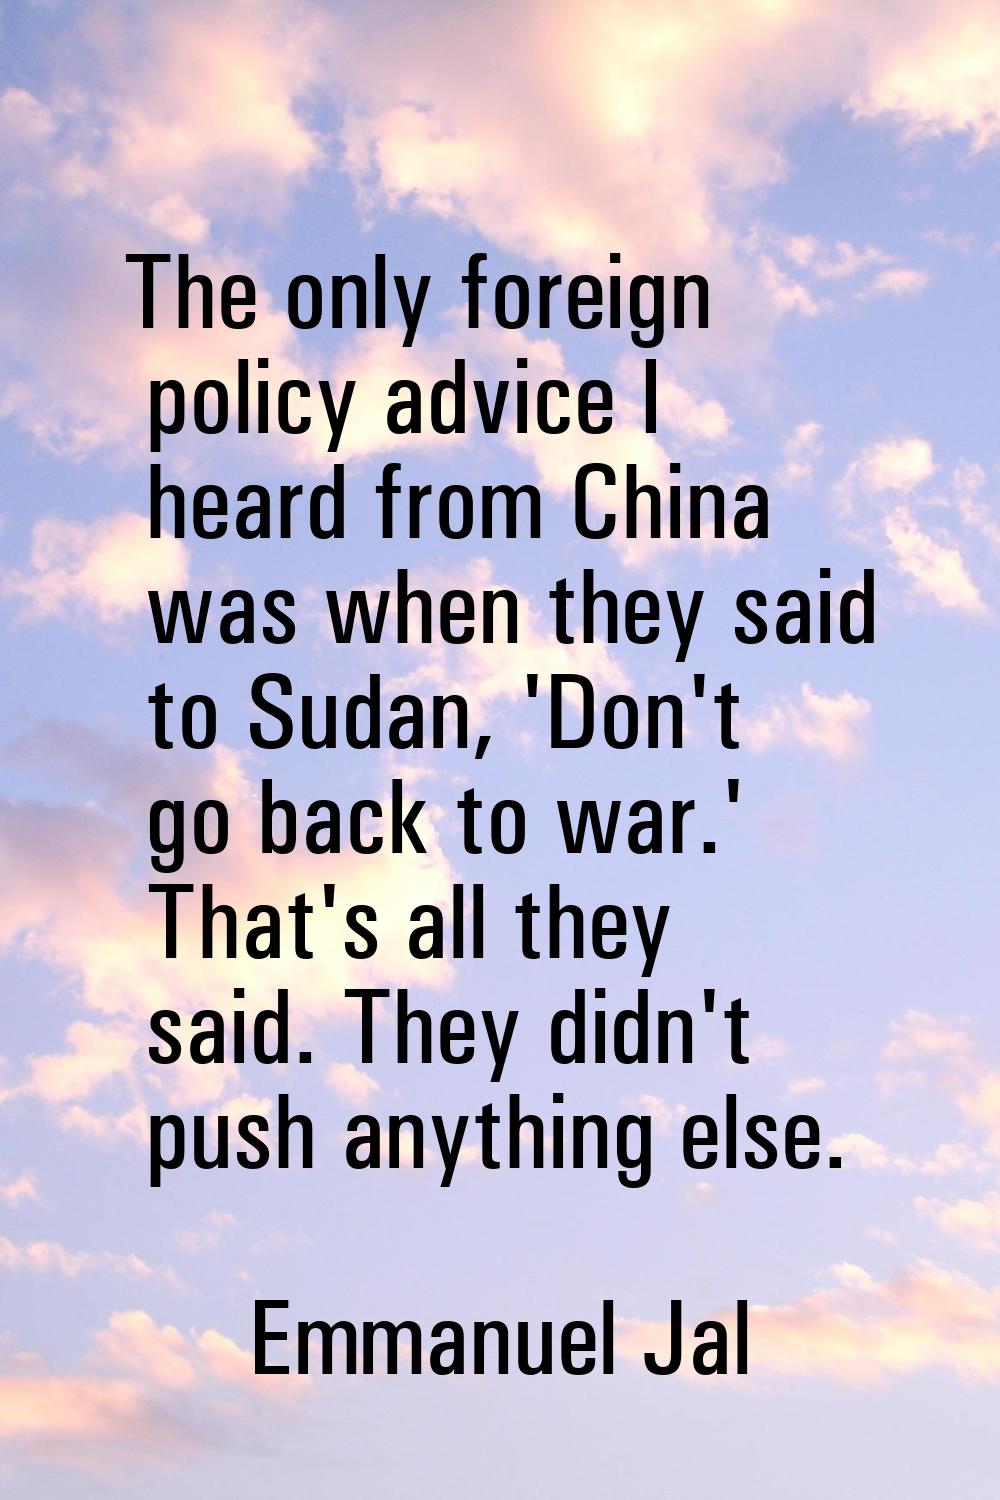 The only foreign policy advice I heard from China was when they said to Sudan, 'Don't go back to wa